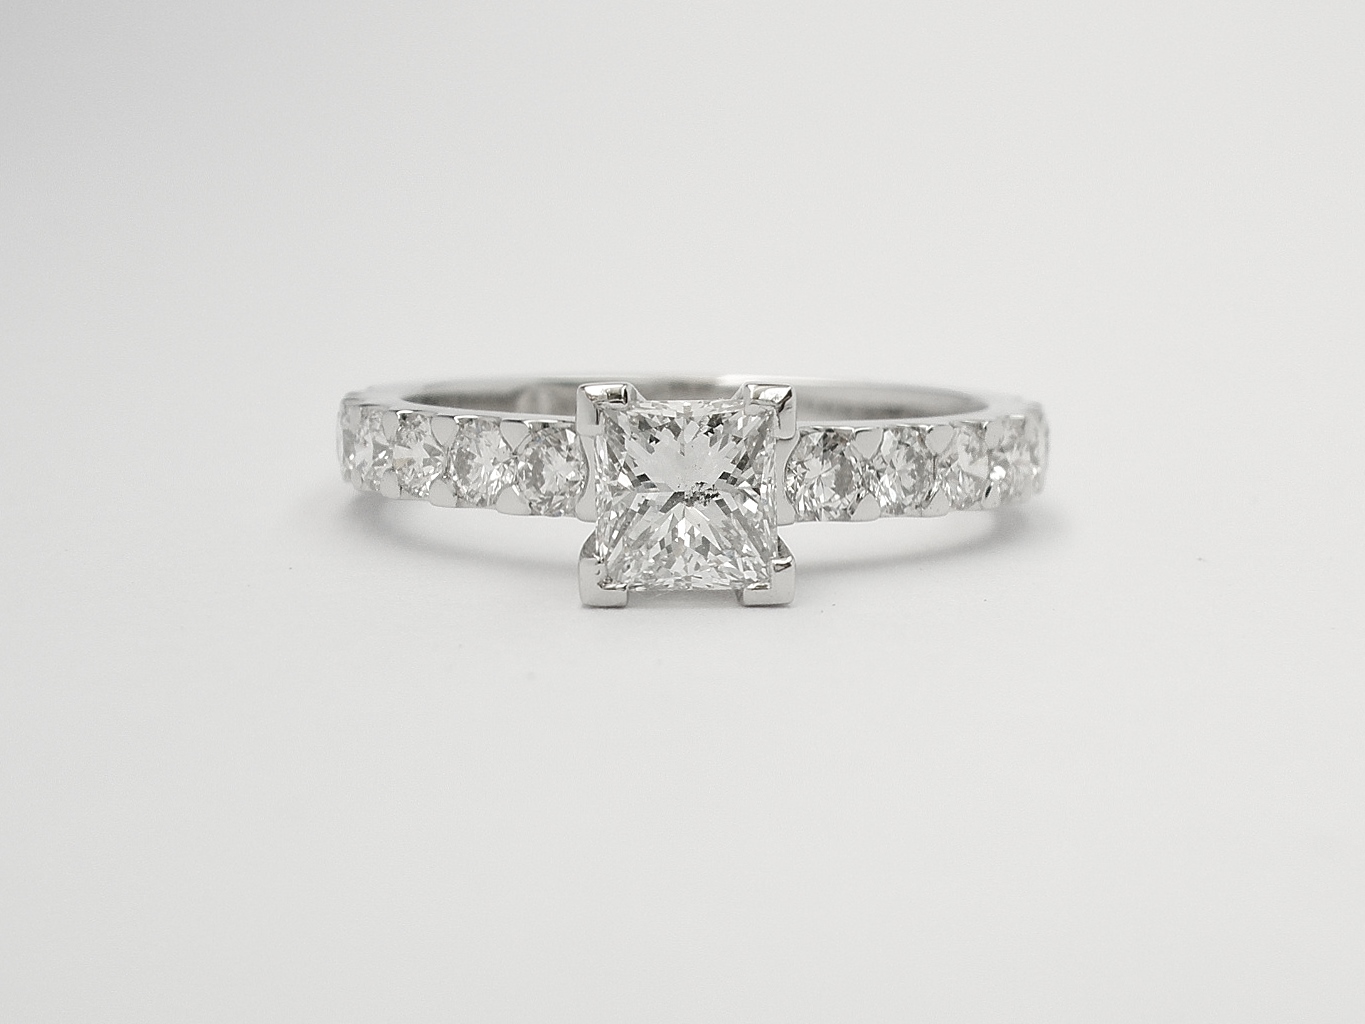 A single princess cut diamond ring mounted in platinum with cut-down set round brilliant cut diamonds in the shoulders.